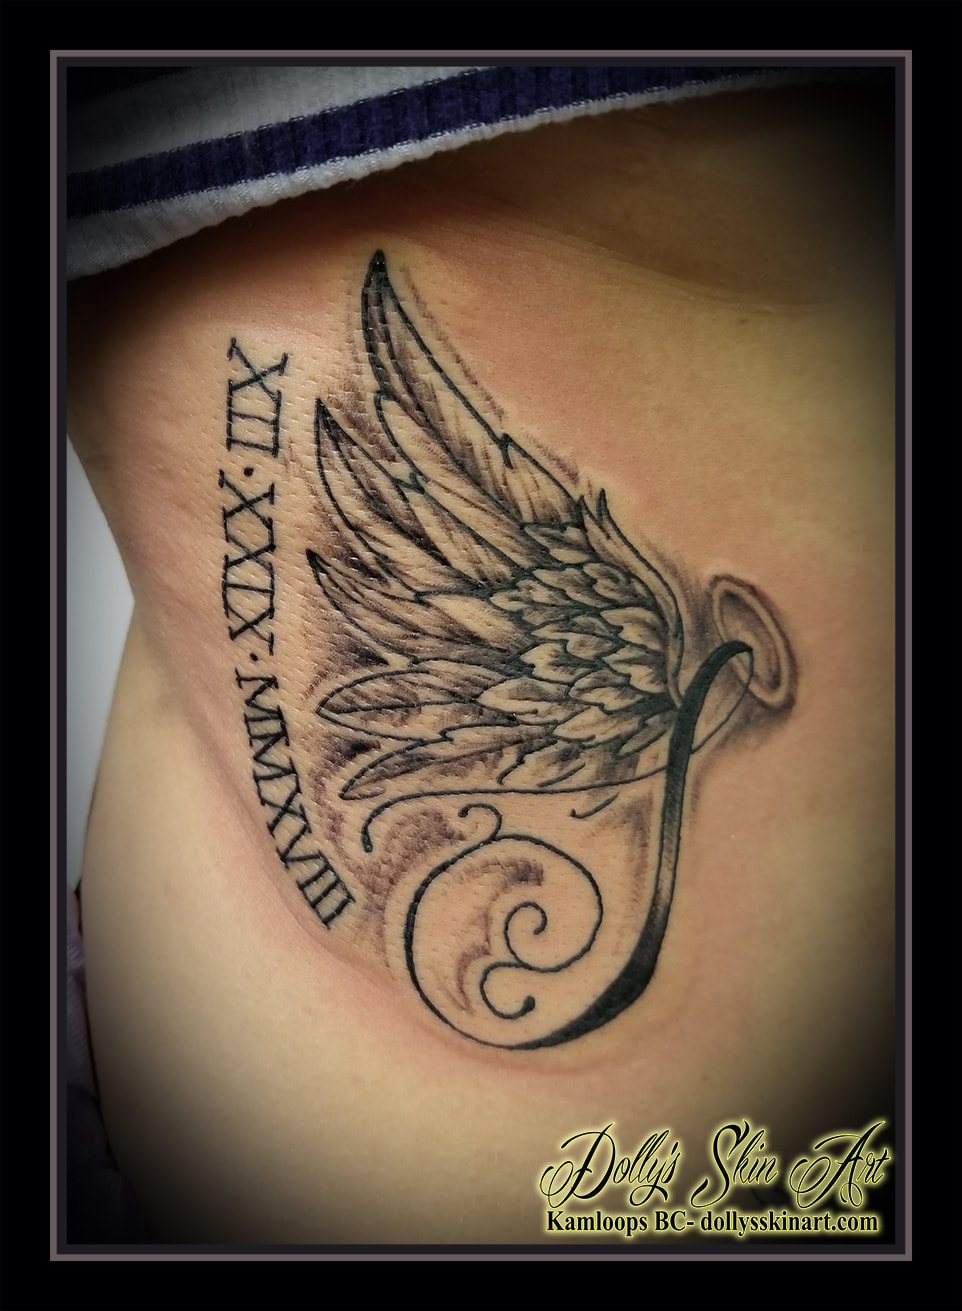 memorial tattoo wing feathers roman numerals halo shadingside black and grey tattoo kamloops tattoo dolly's skin art